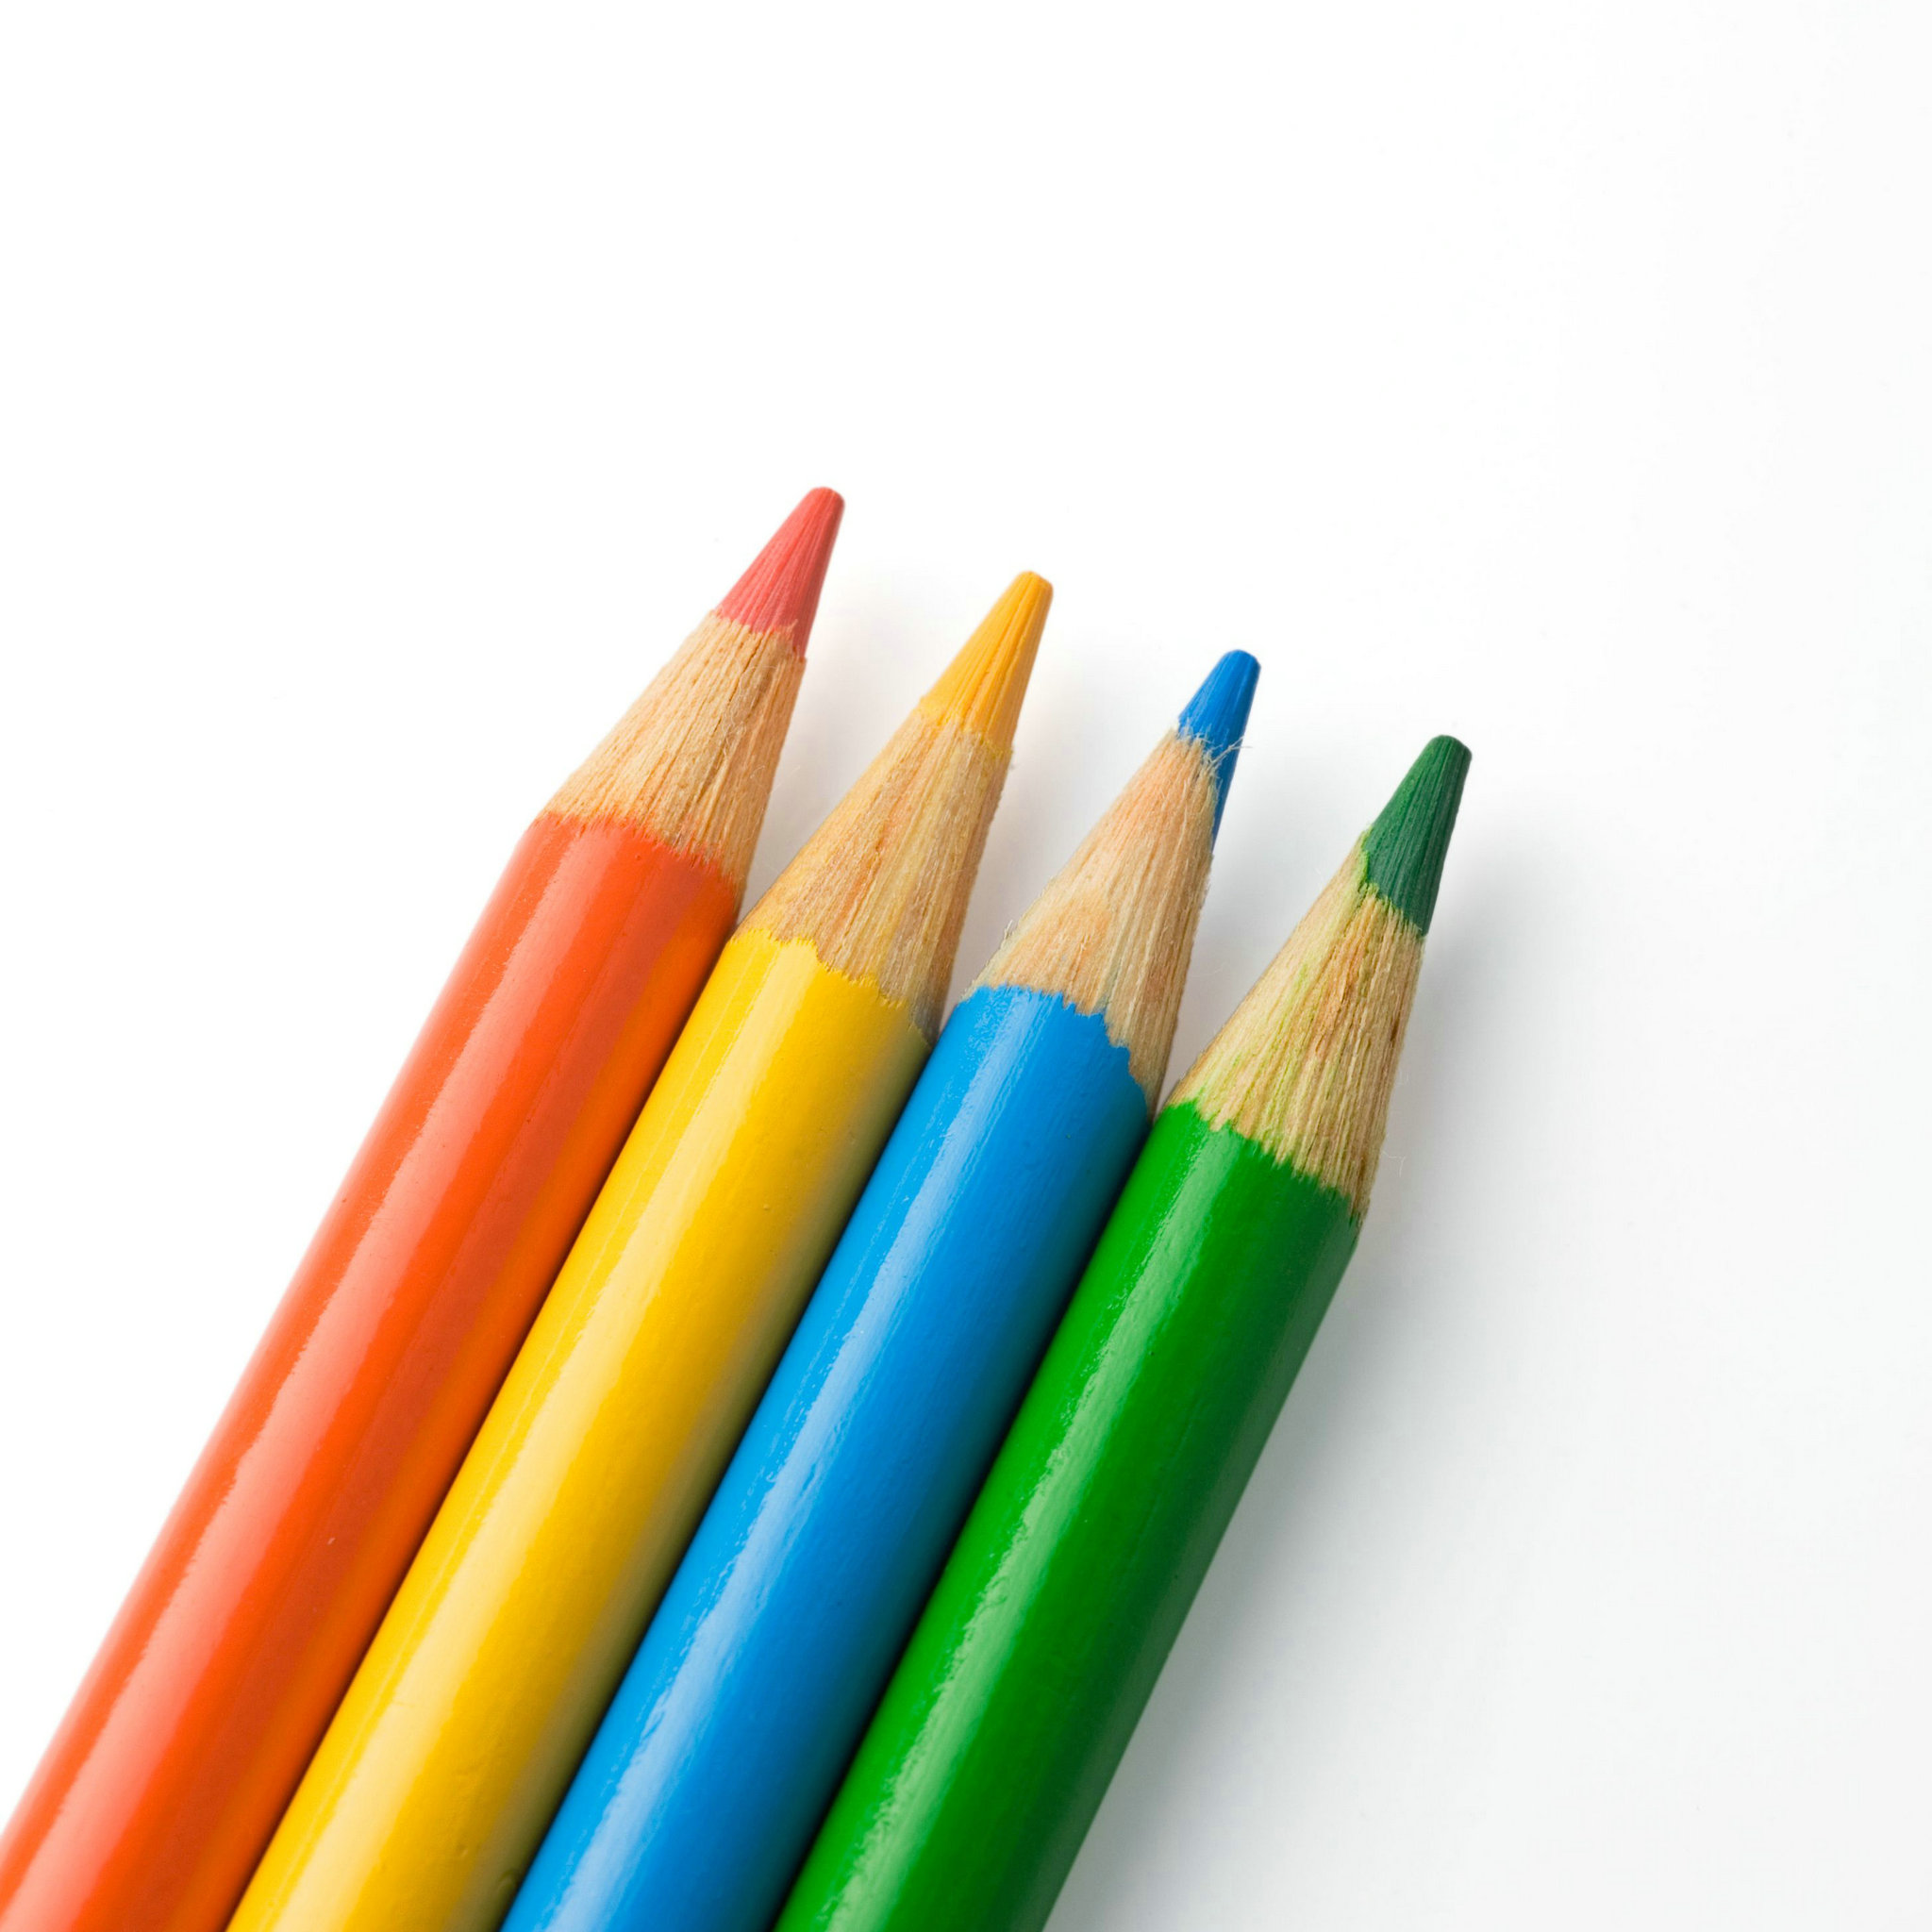 Rainbow Colored Pencils   Clipart Panda   Free Clipart Images